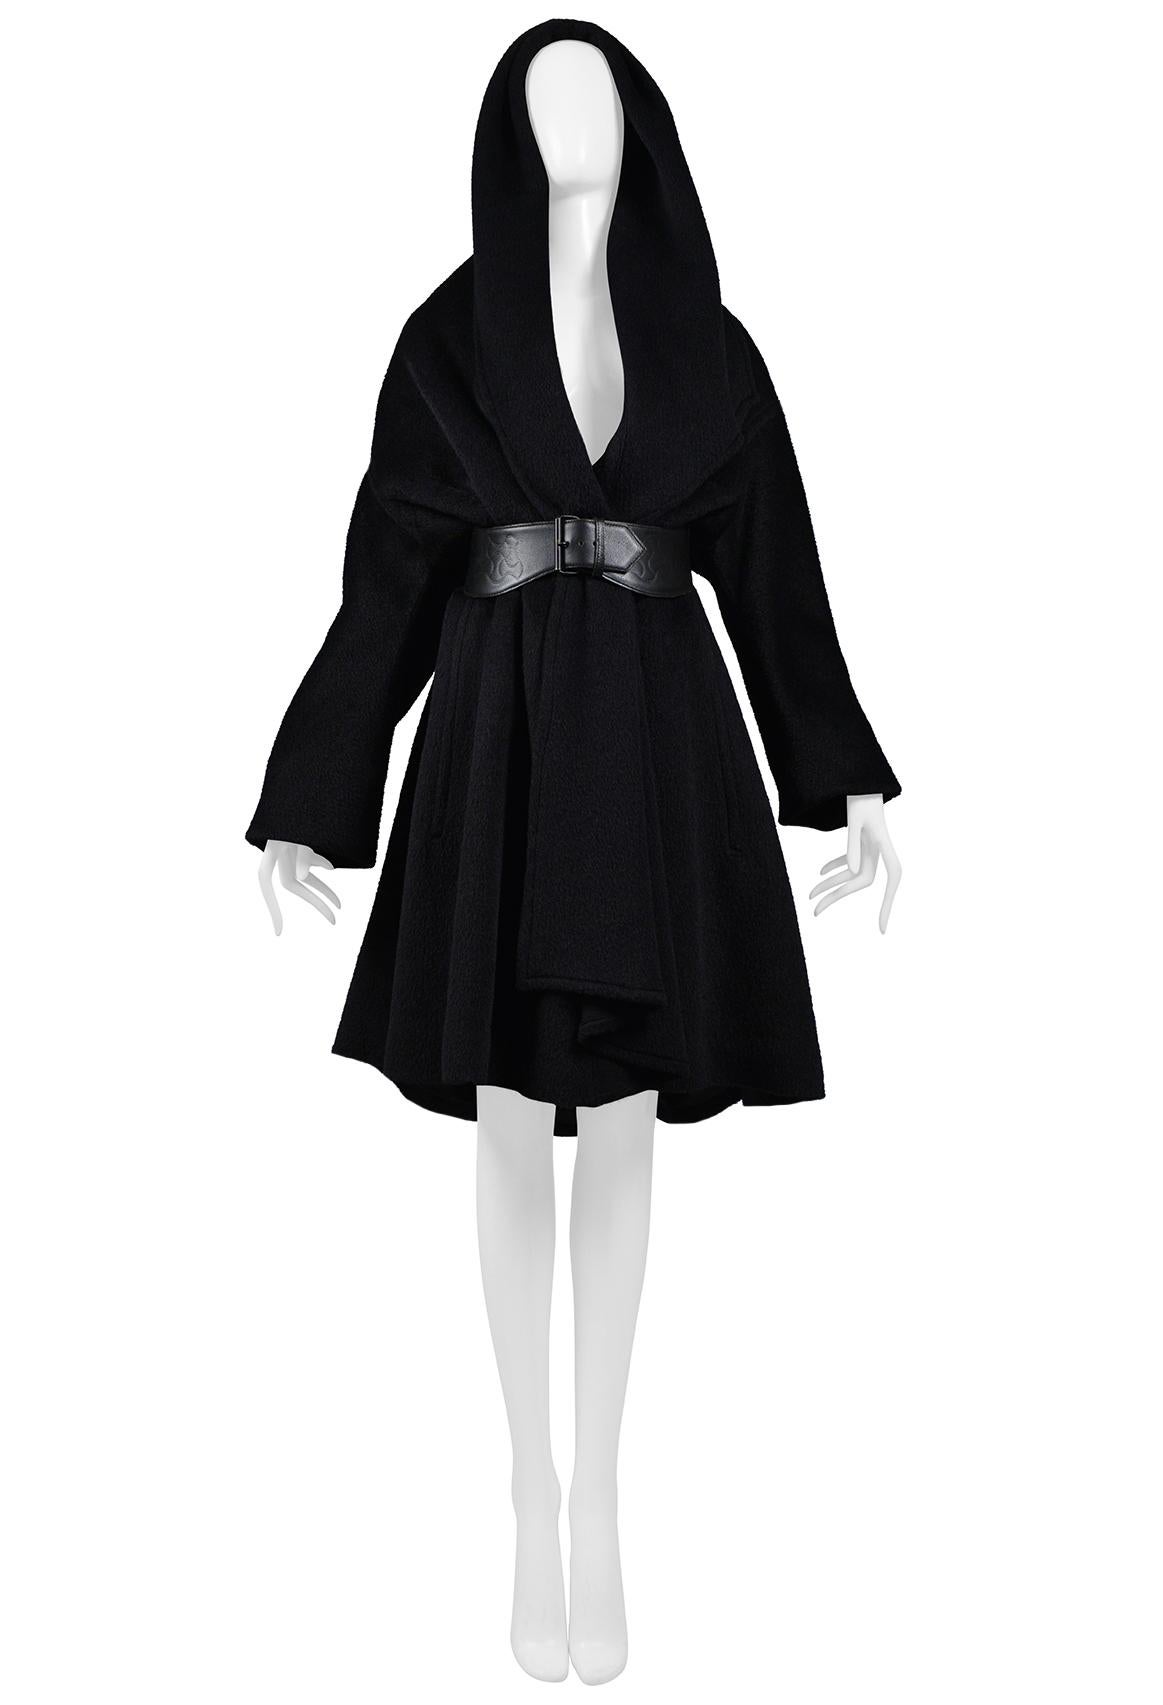 Thierry Mugler Black Alpaca Hooded Cape Coat For Sale 4